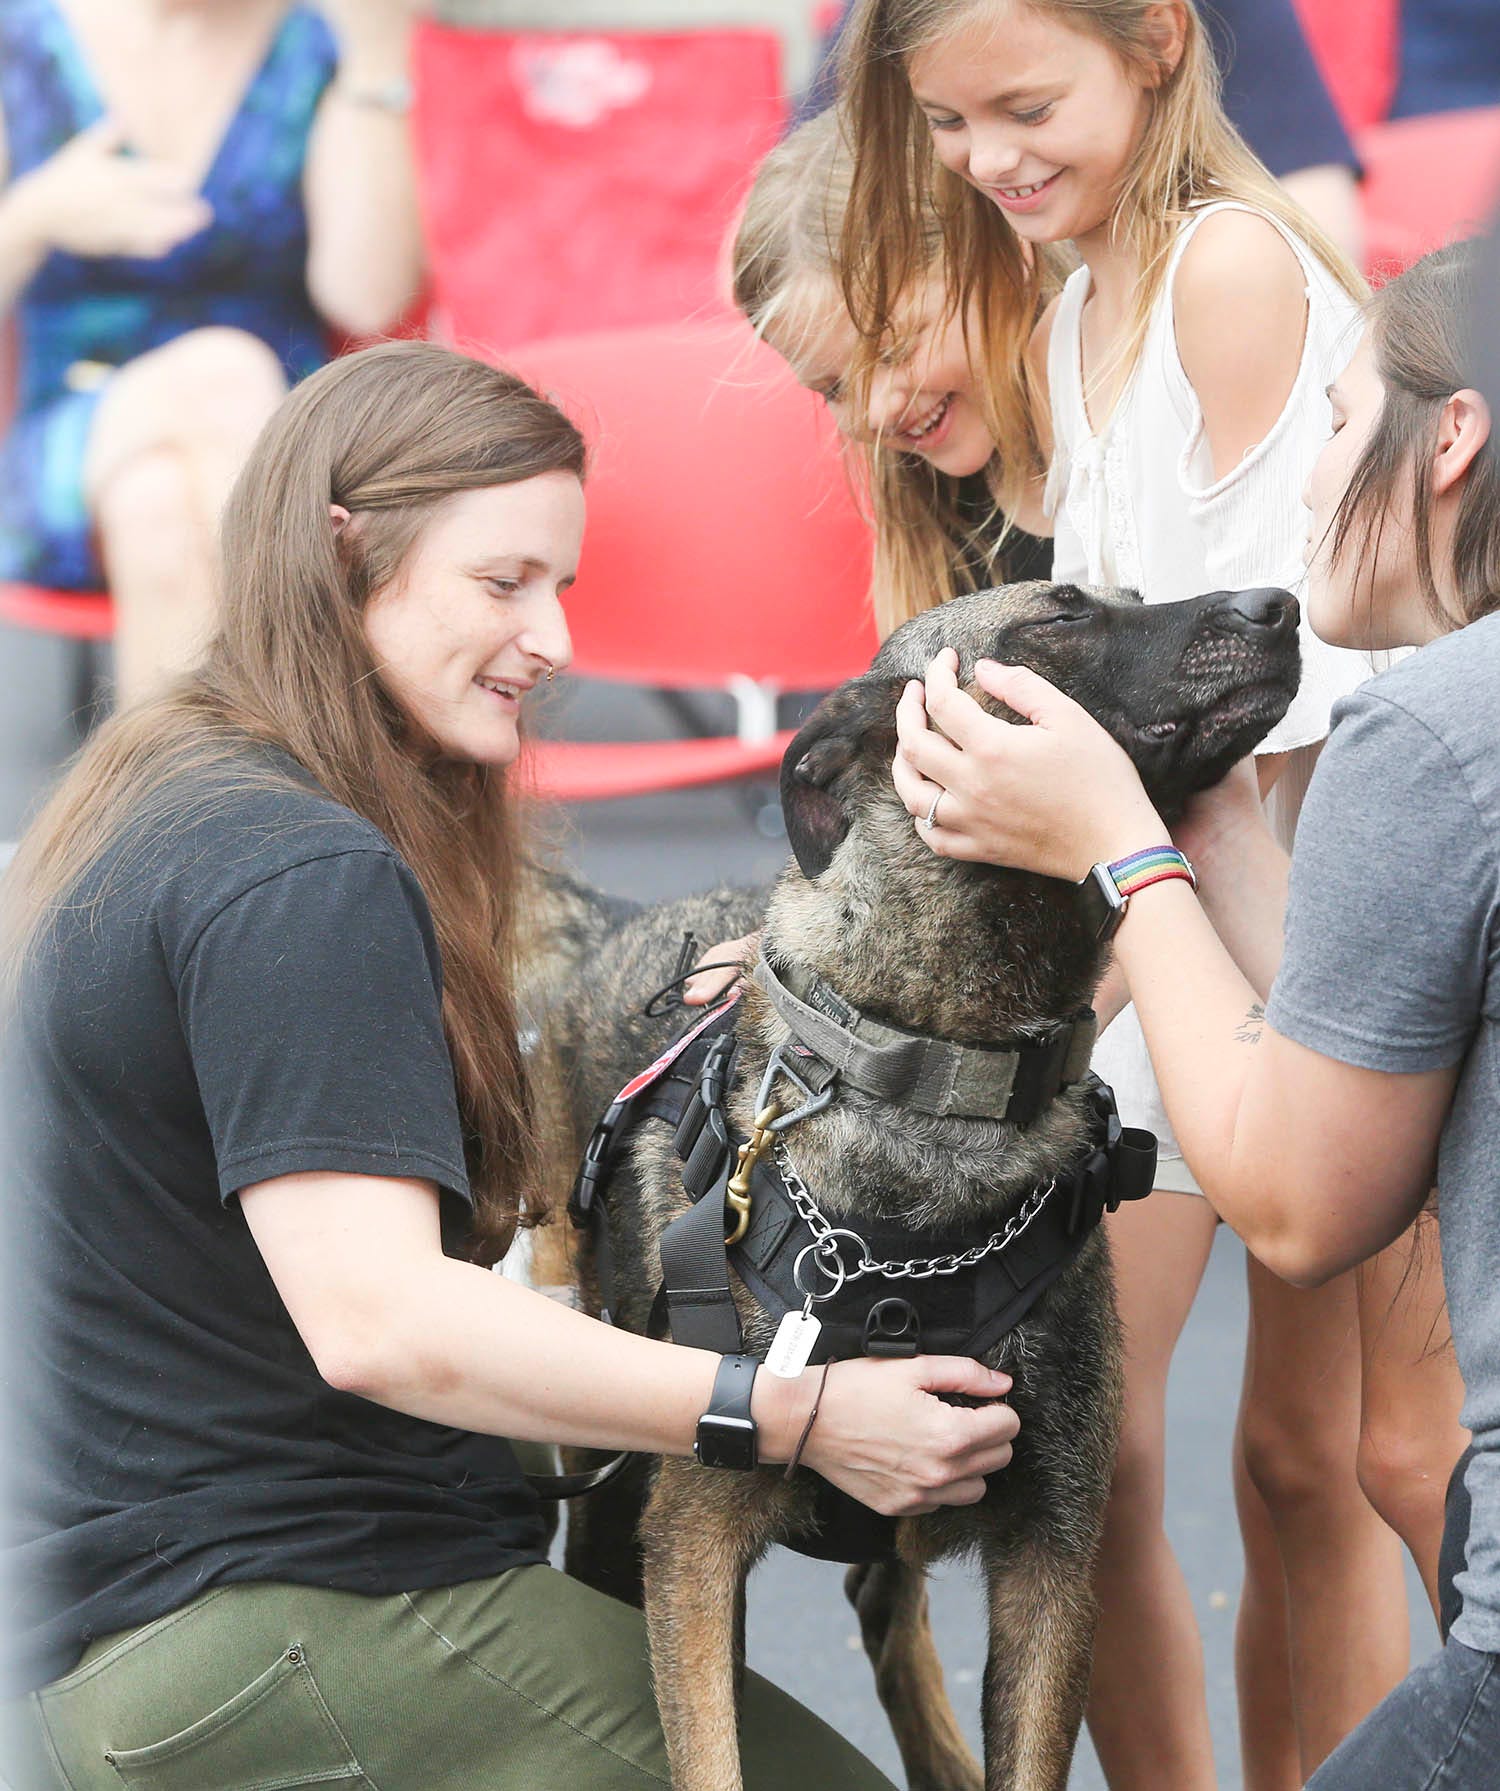 Staff Sgt. Porschia Allio-Easom,left, greets retired military dog Luna in a reunion event at the Eglin Federal Credit Union on Eglin Parkway in Fort Walton Beach along with daughters Ruby Allio, Shaylee Allio and wife Shelby Allio-Easom .